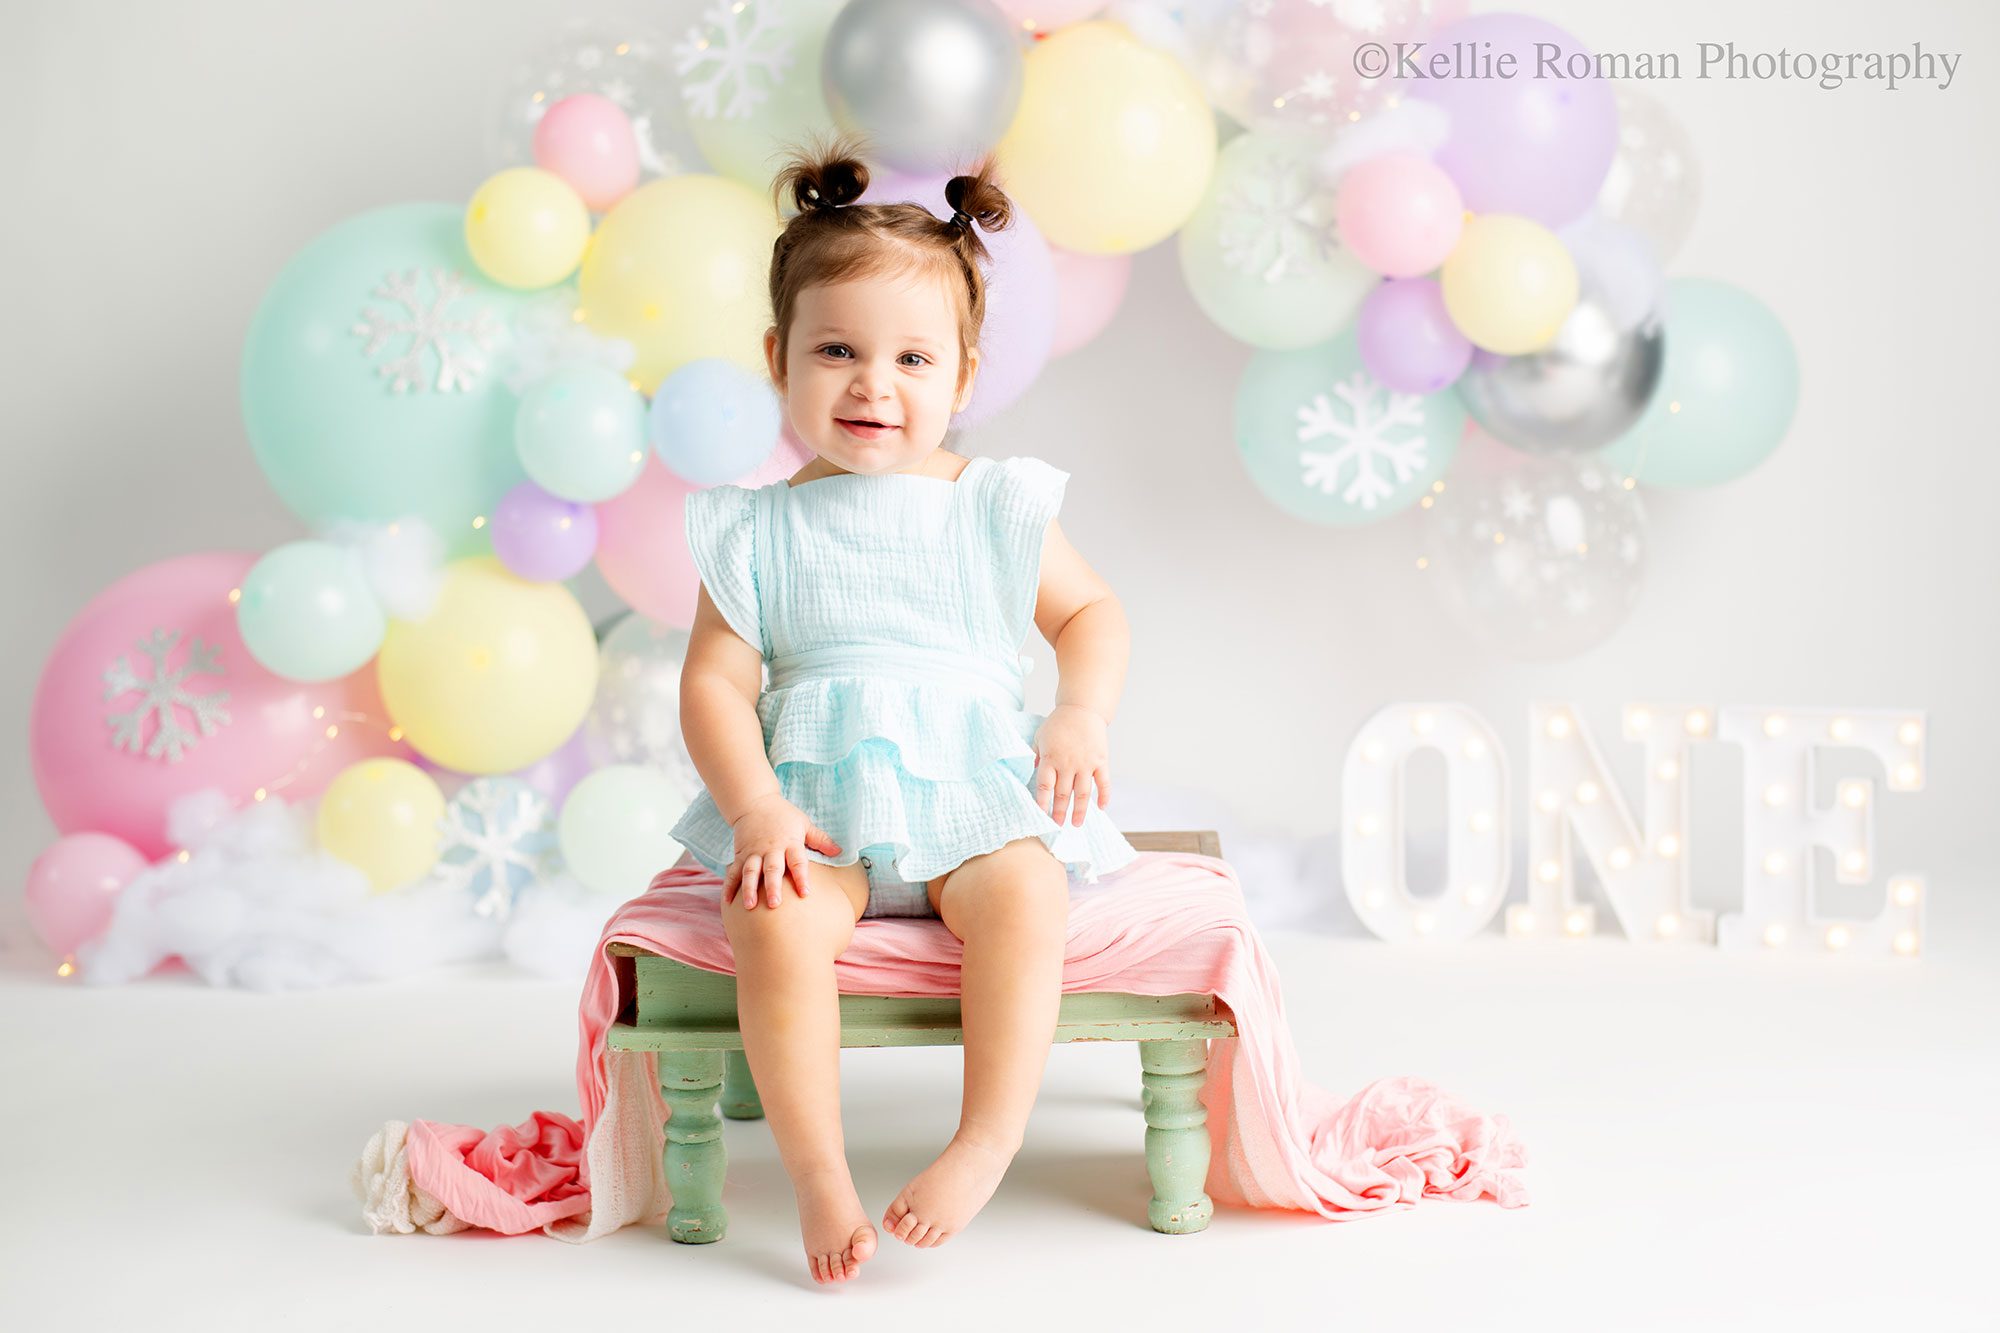 milwaukee pastel cake smash. one year old girl sitting on a teal wood bench with pink fabric over it. she's wearing a light blue romper and has pig tails. she's smiling at the camera. the background is pastel balloon garland with snowflakes and little lights.